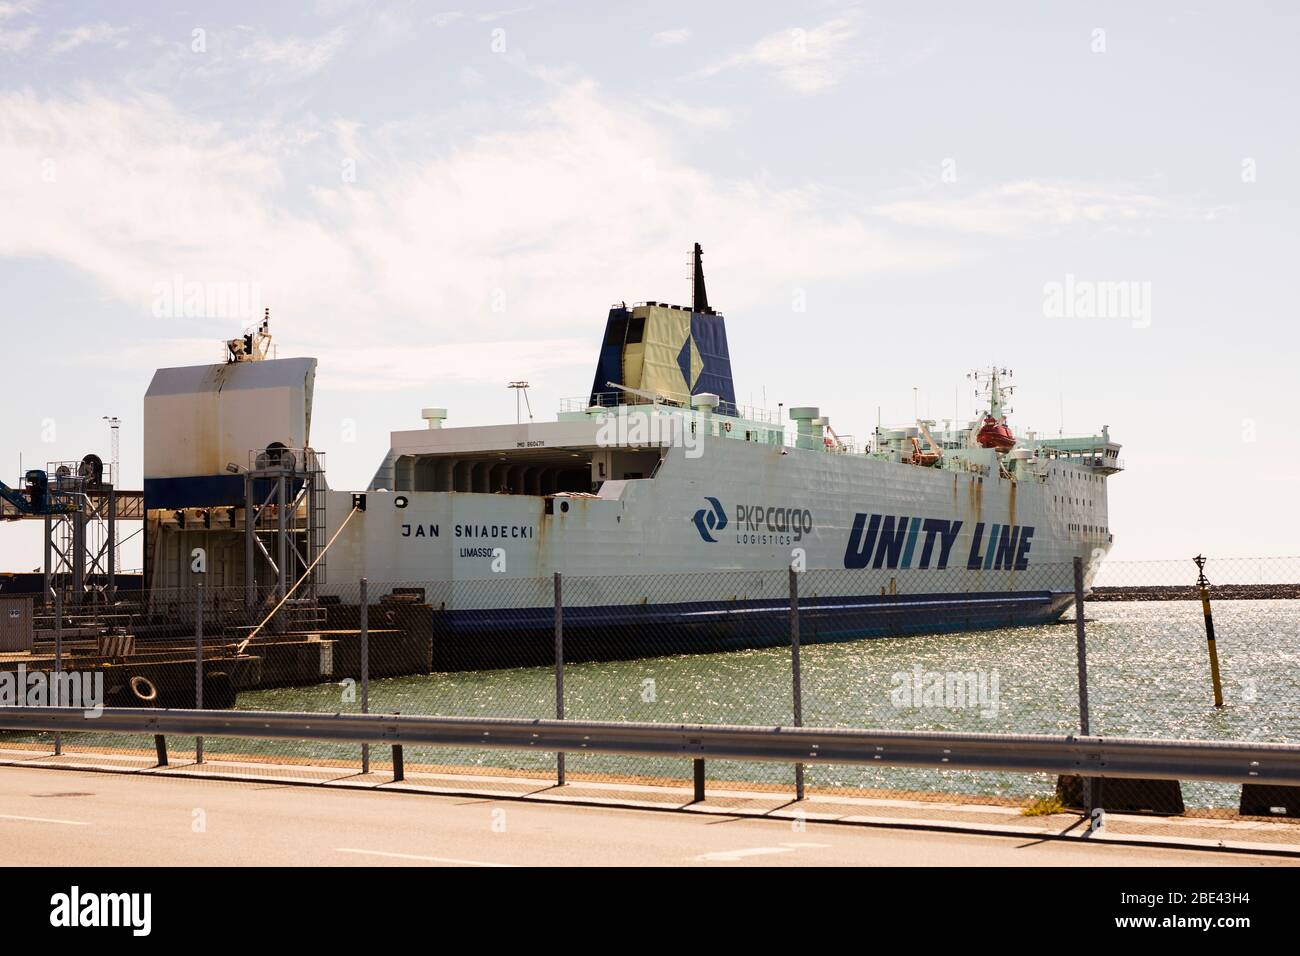 The PKP Cargo Jan Śniadecki Unity Line car and train ferry, docked in Ystad, Sweden, before sailing to Swinoujscie, Poland, across the Baltic Sea. Stock Photo